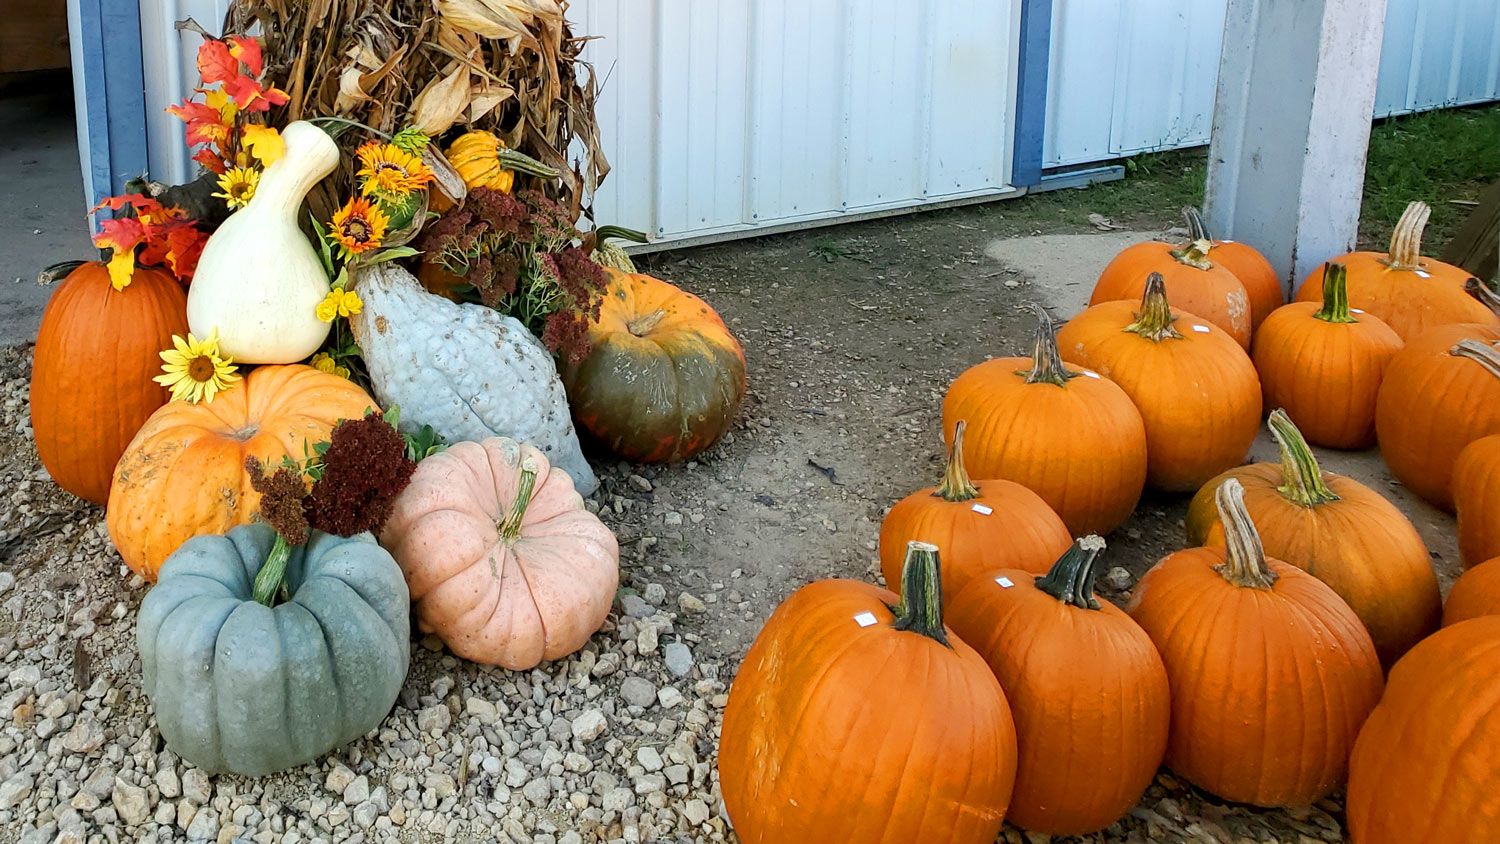 Autumnal display and pumpkins at Cody's Farm and Orchard.